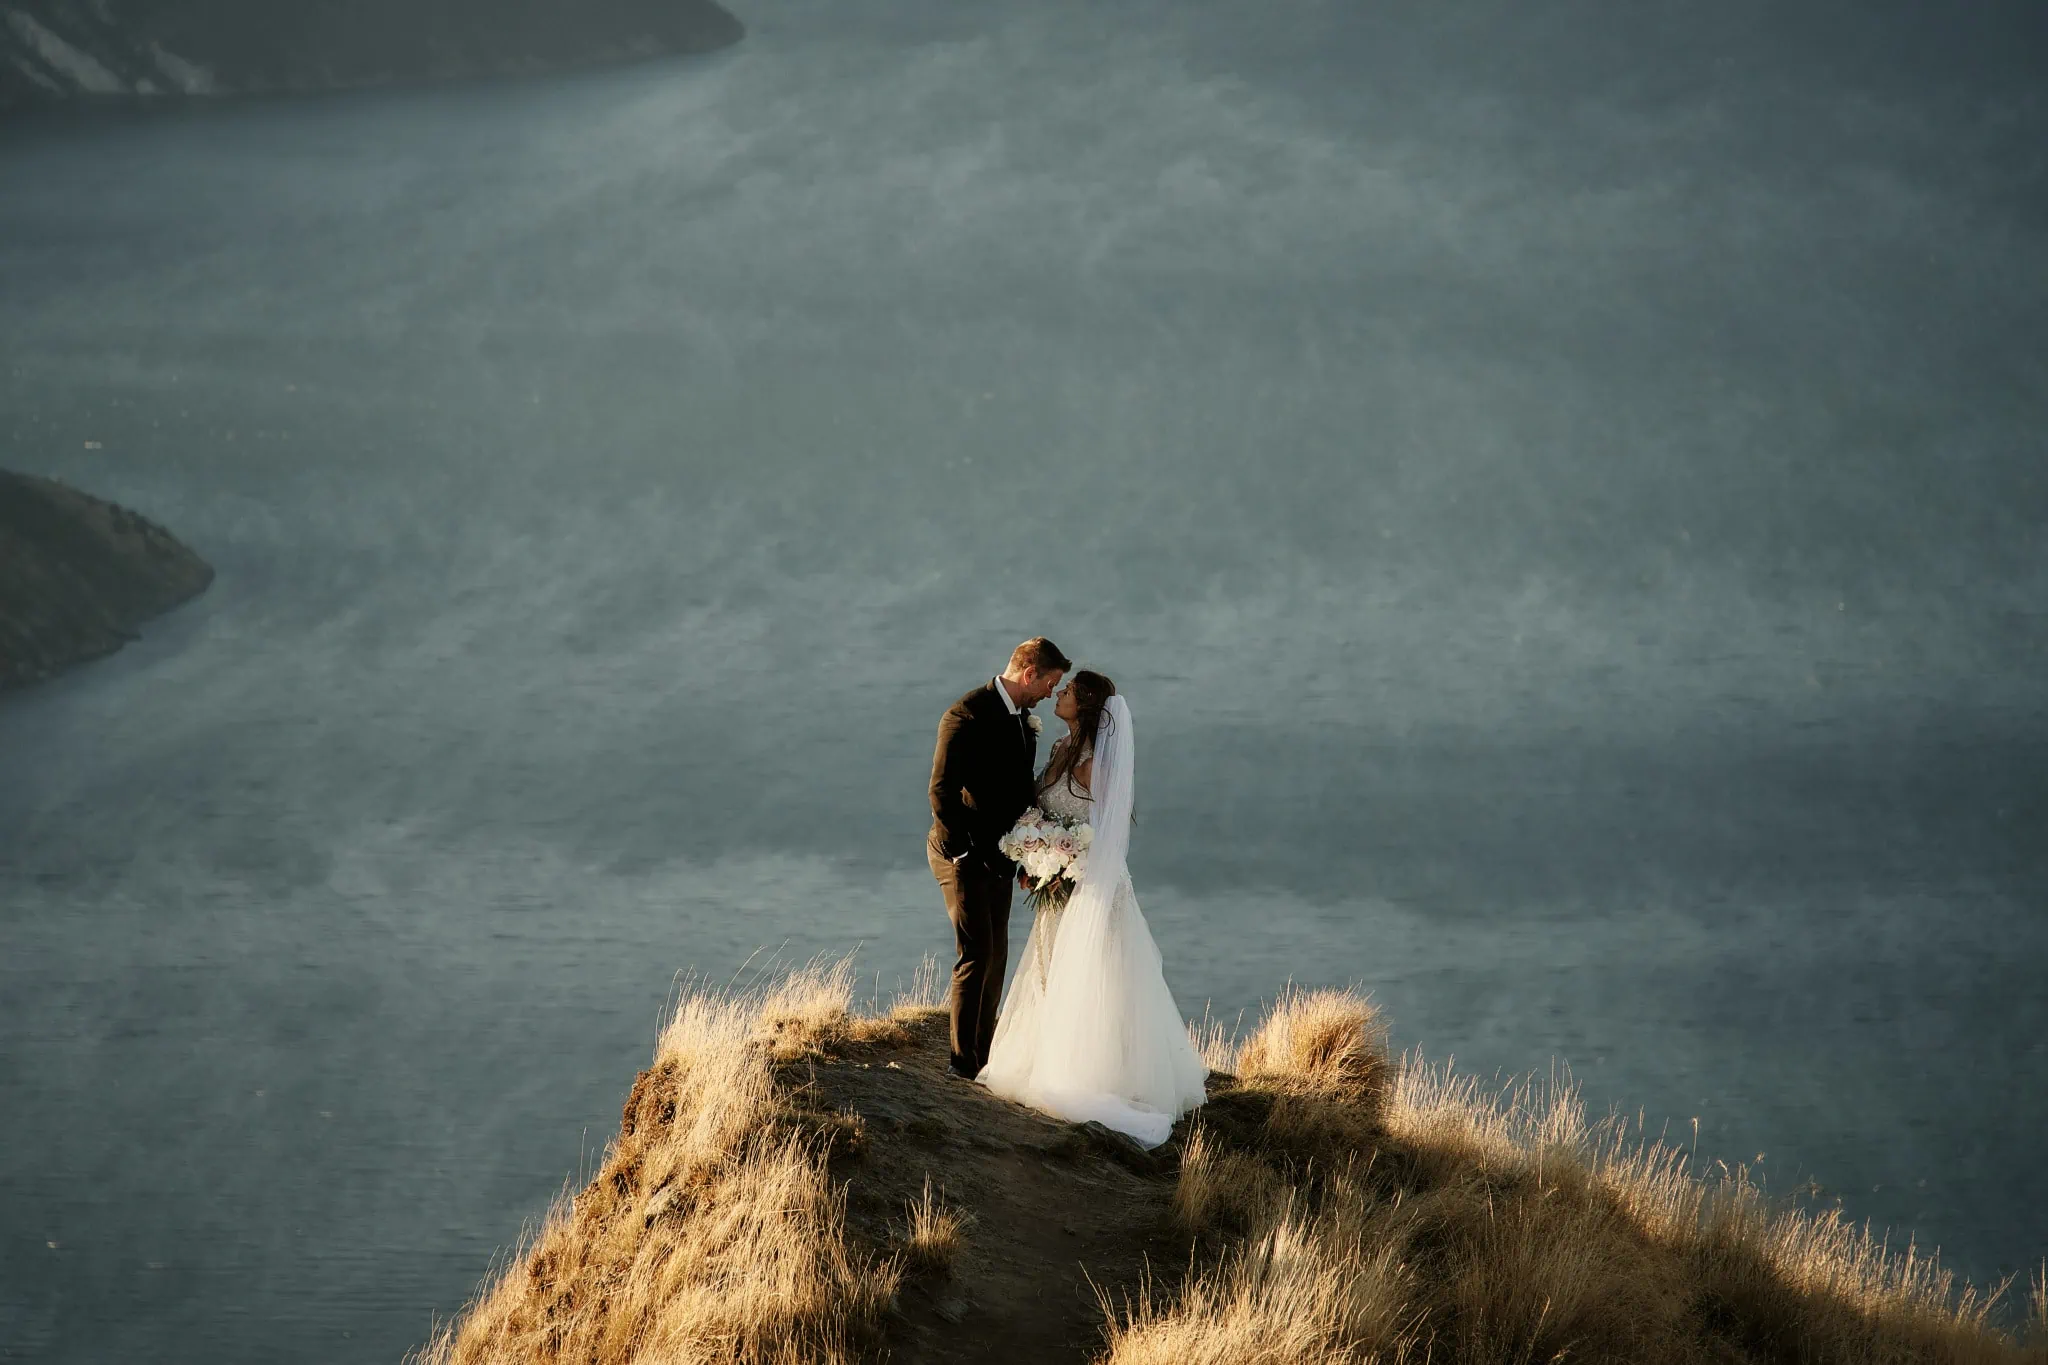 Queenstown New Zealand Elopement Wedding Photographer - Ashleigh and Anthony's Roy's Peak Heli Elopement Wedding on top of a cliff overlooking a lake.